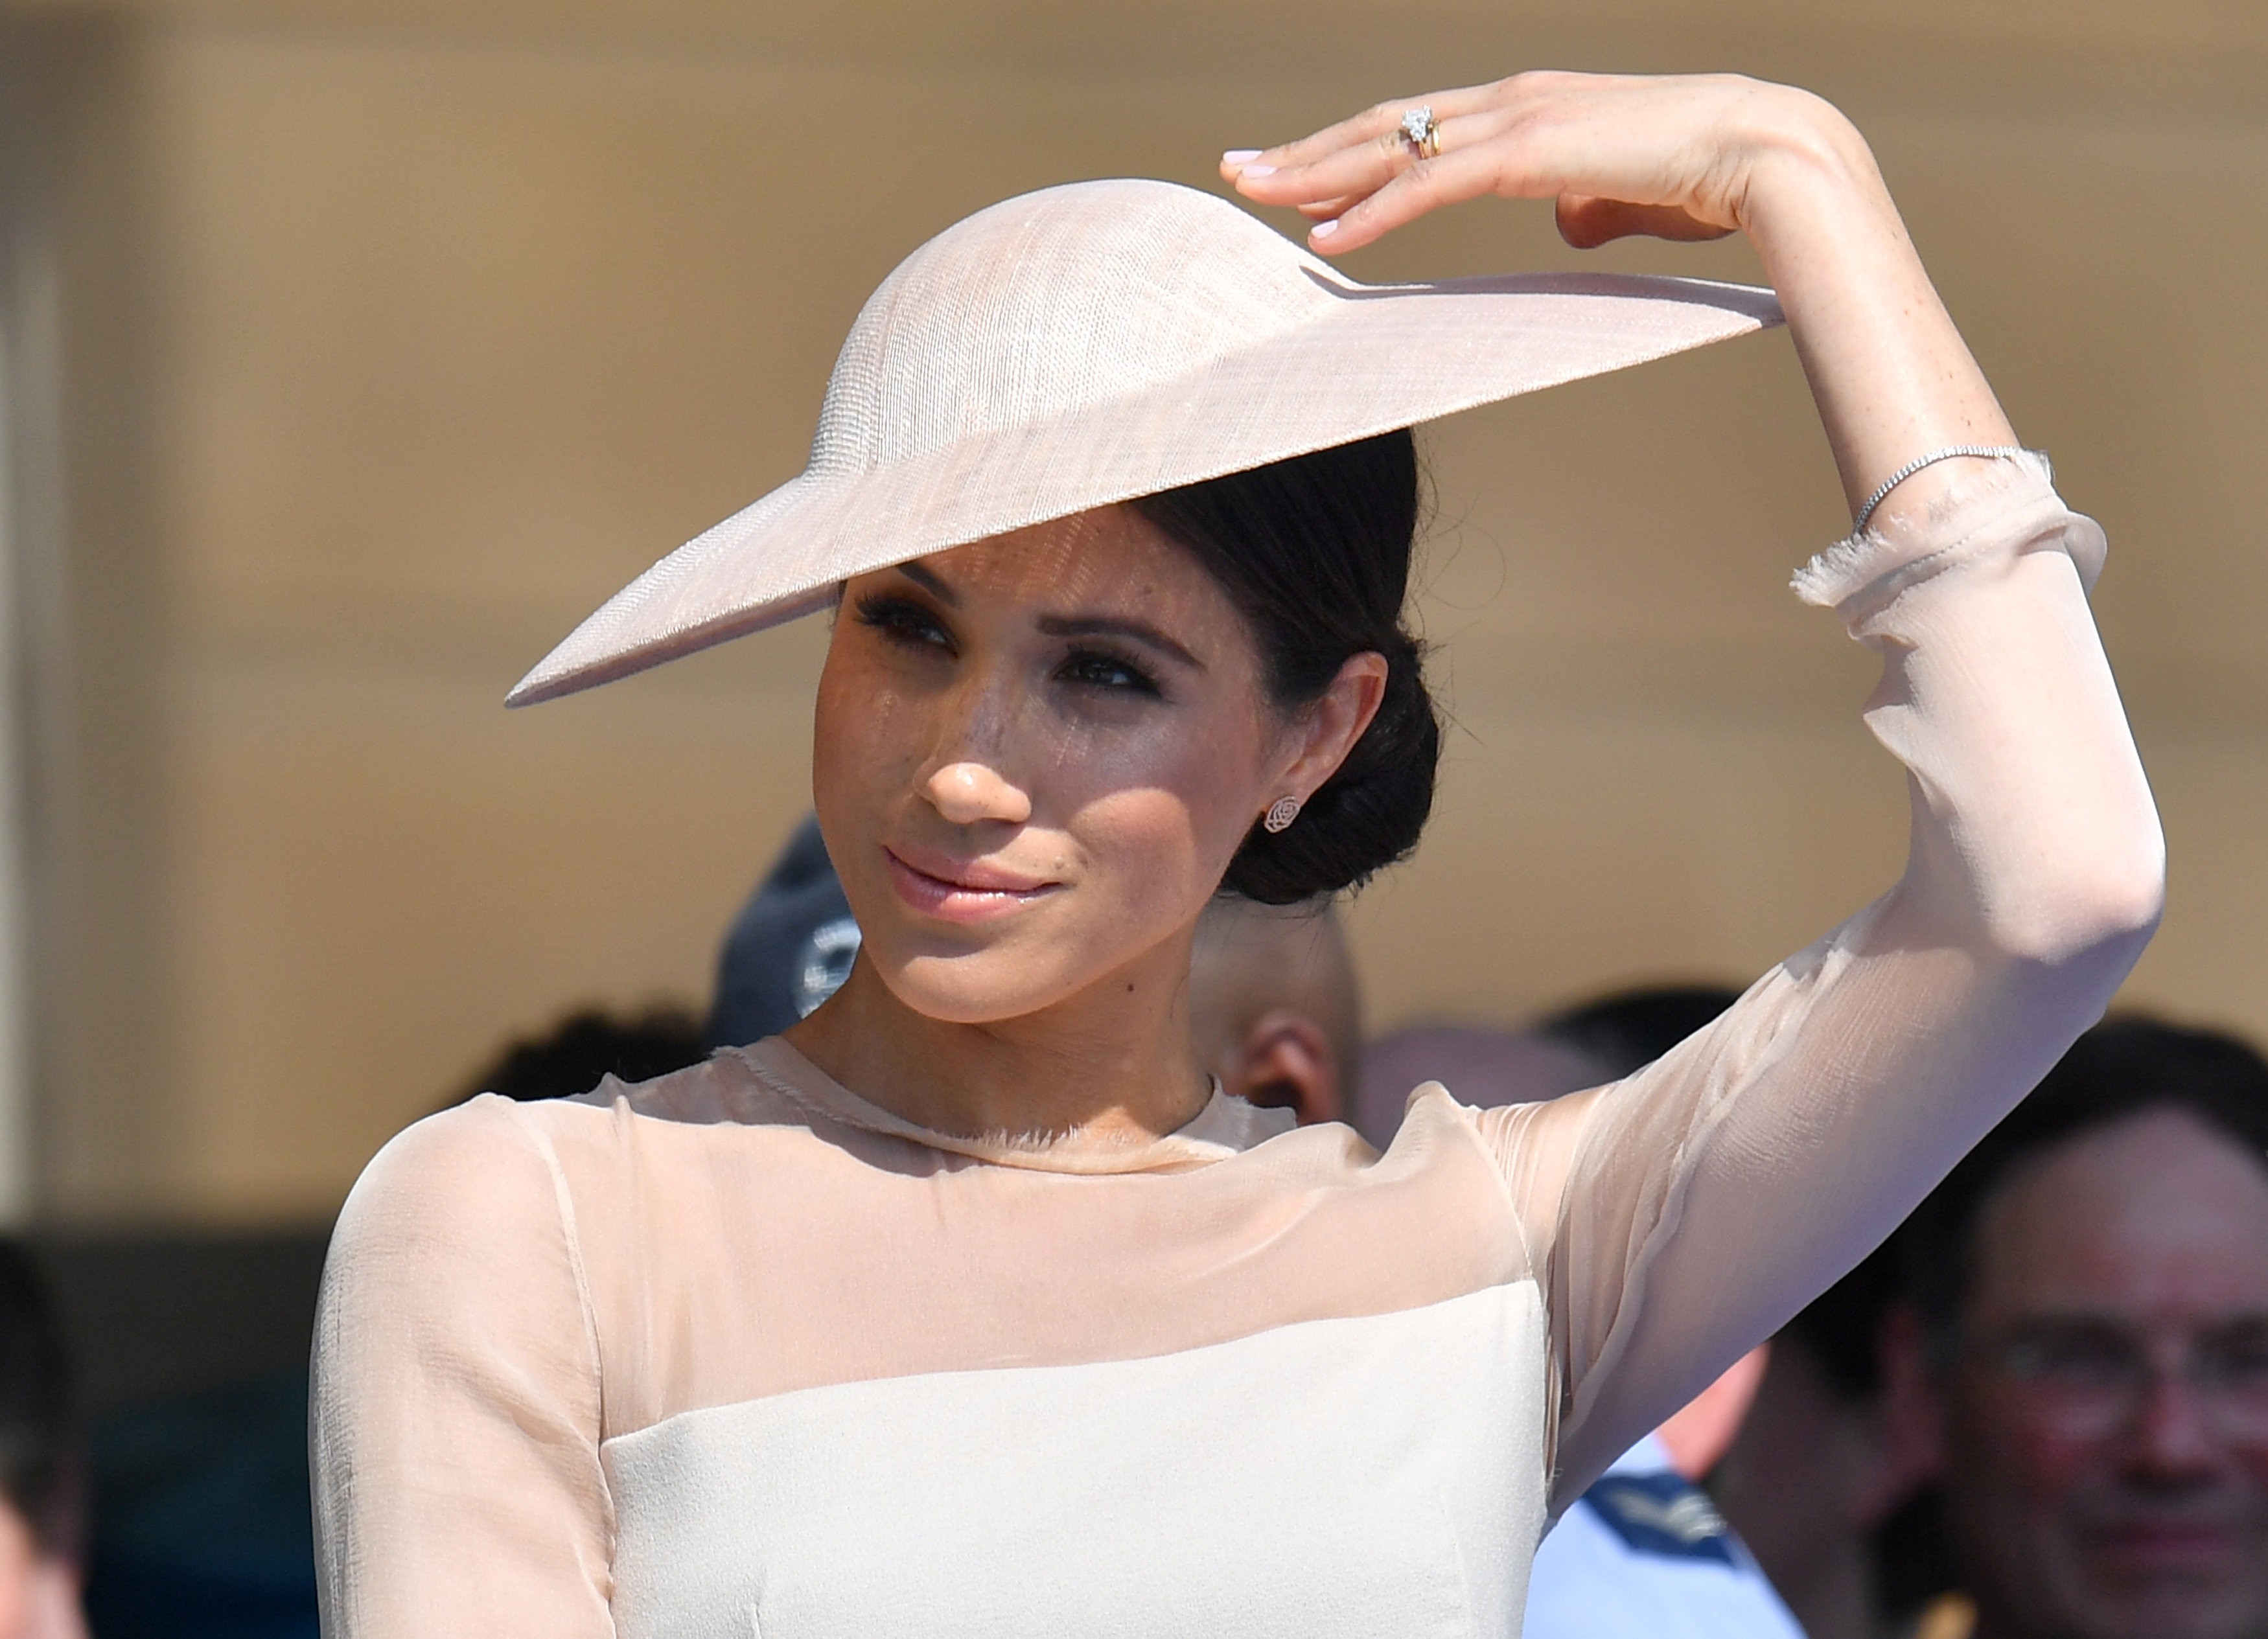 As well as being vegan, Meghan Markle is also the first mixed-race person to marry into the British royal family. Photo: Reuters